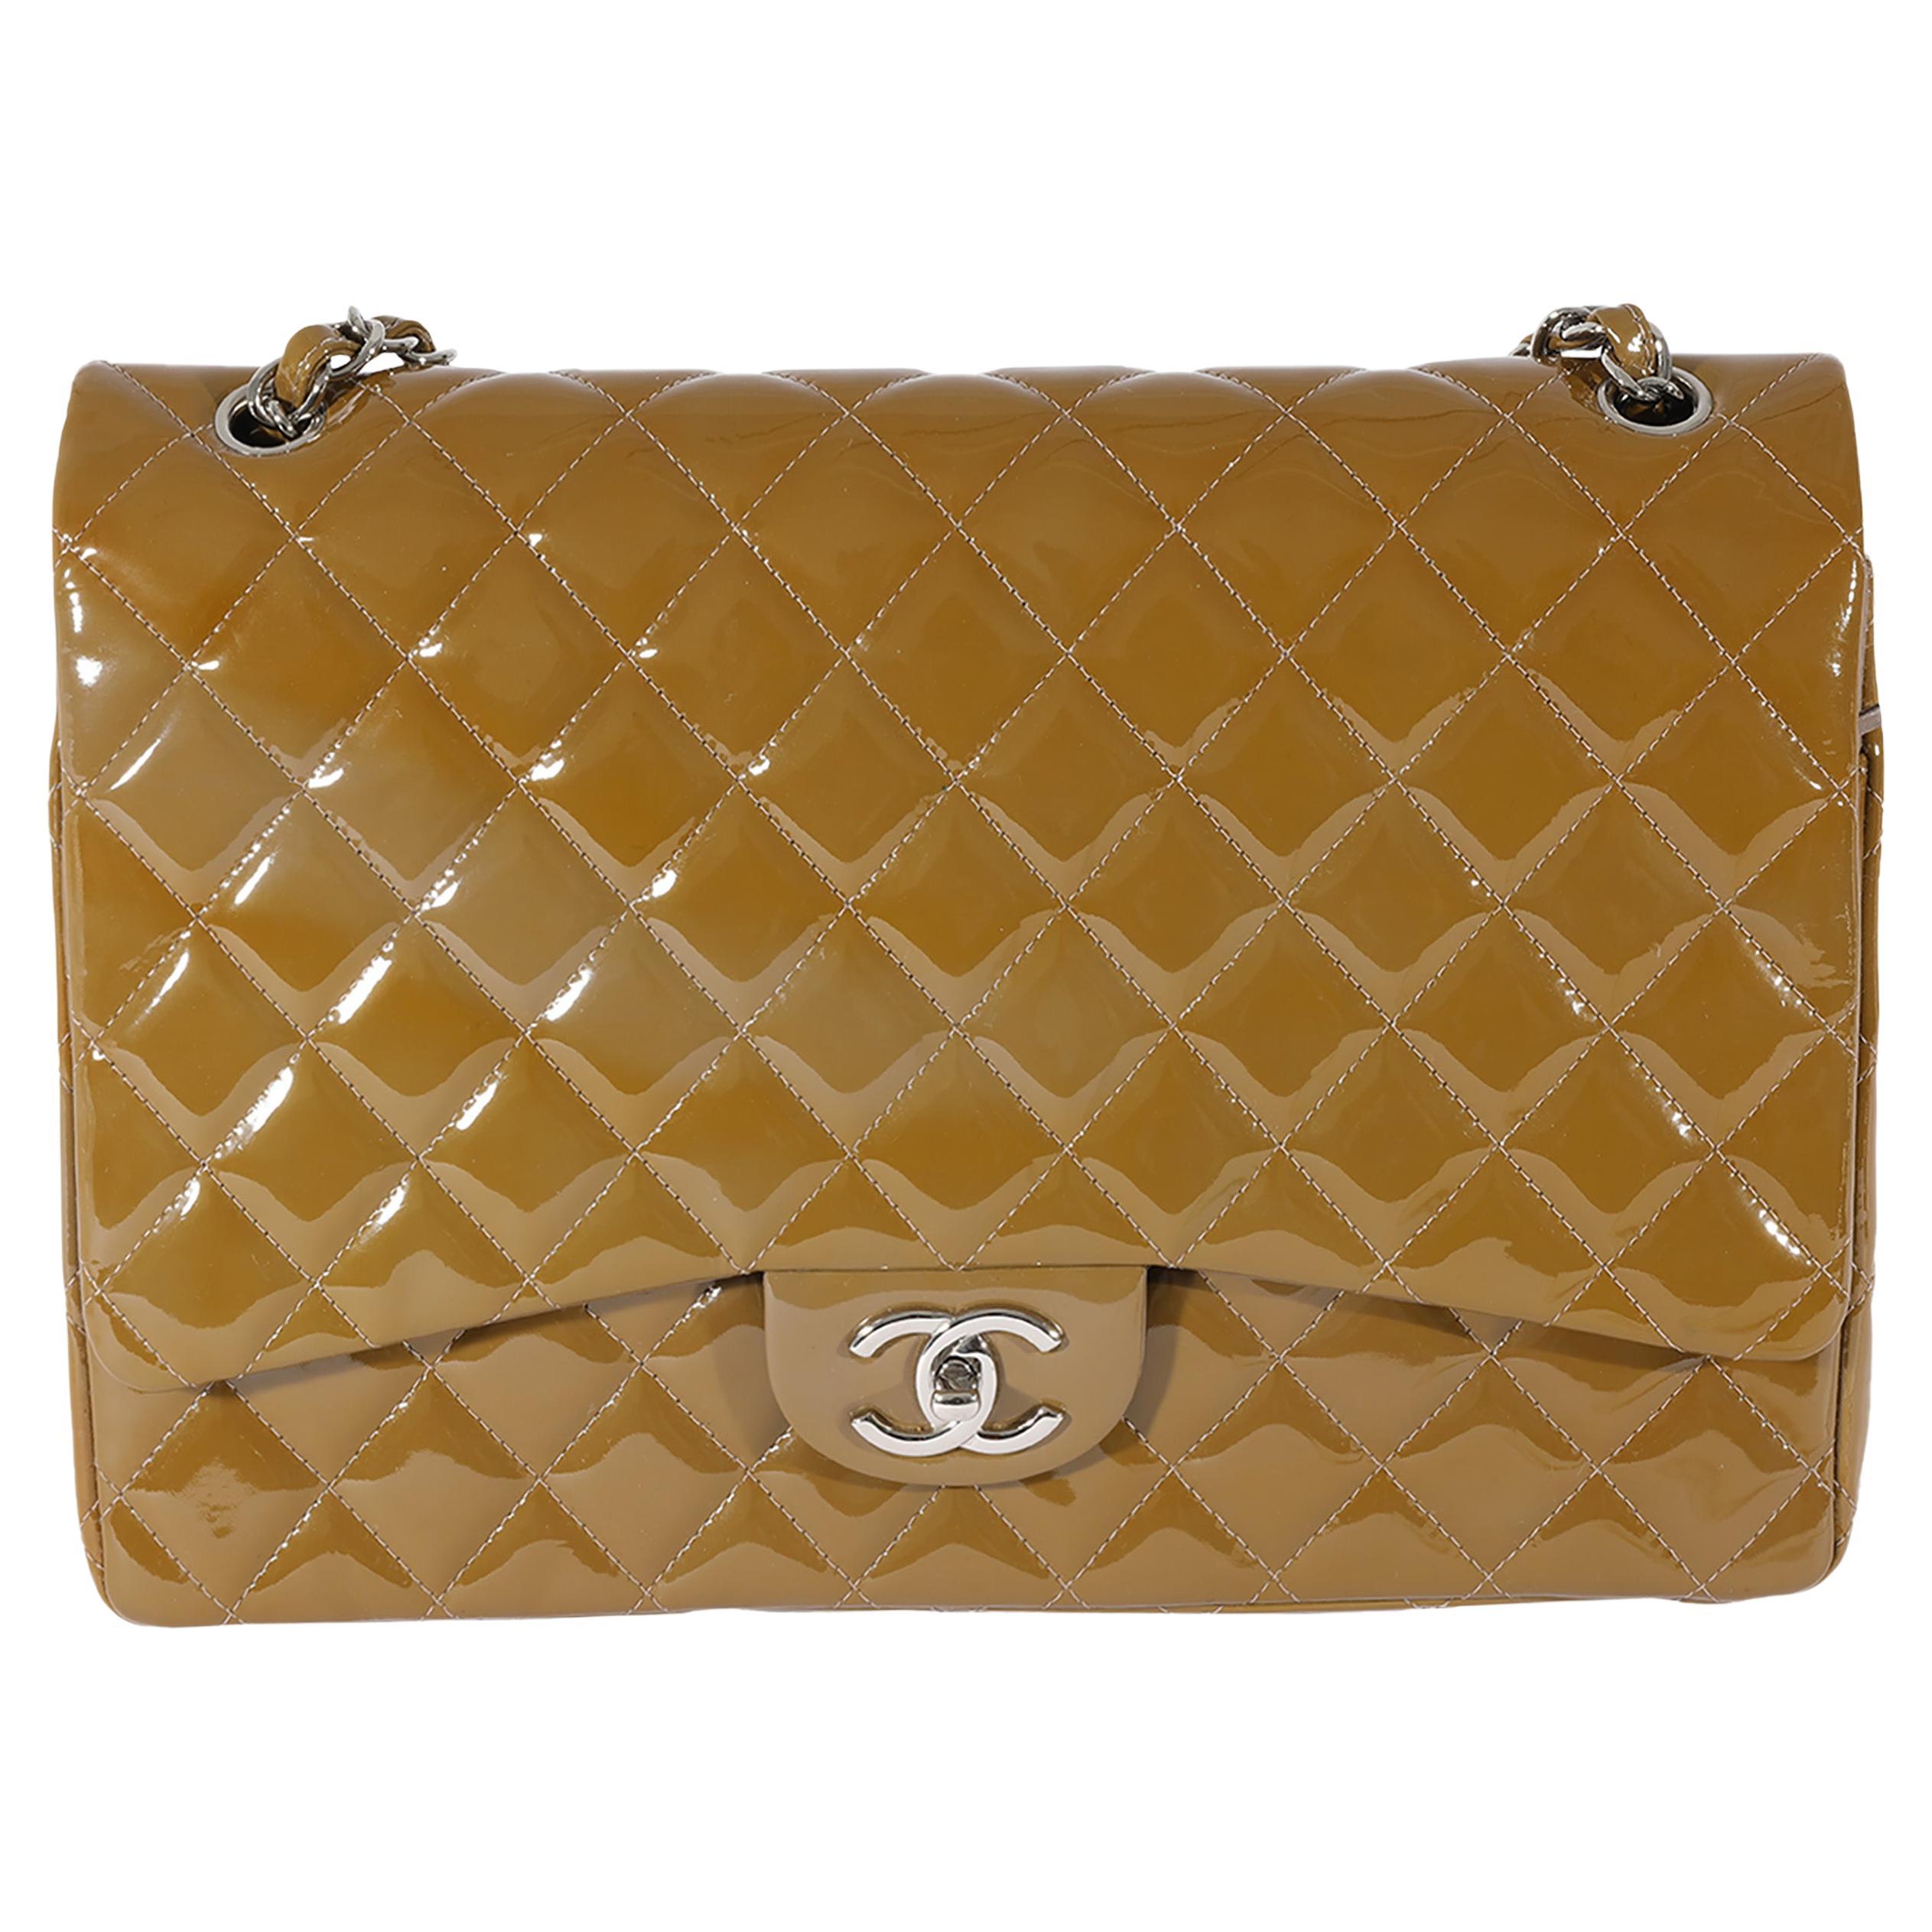 Chanel Tan Quilted Patent Leather Maxi Double Flap For Sale at